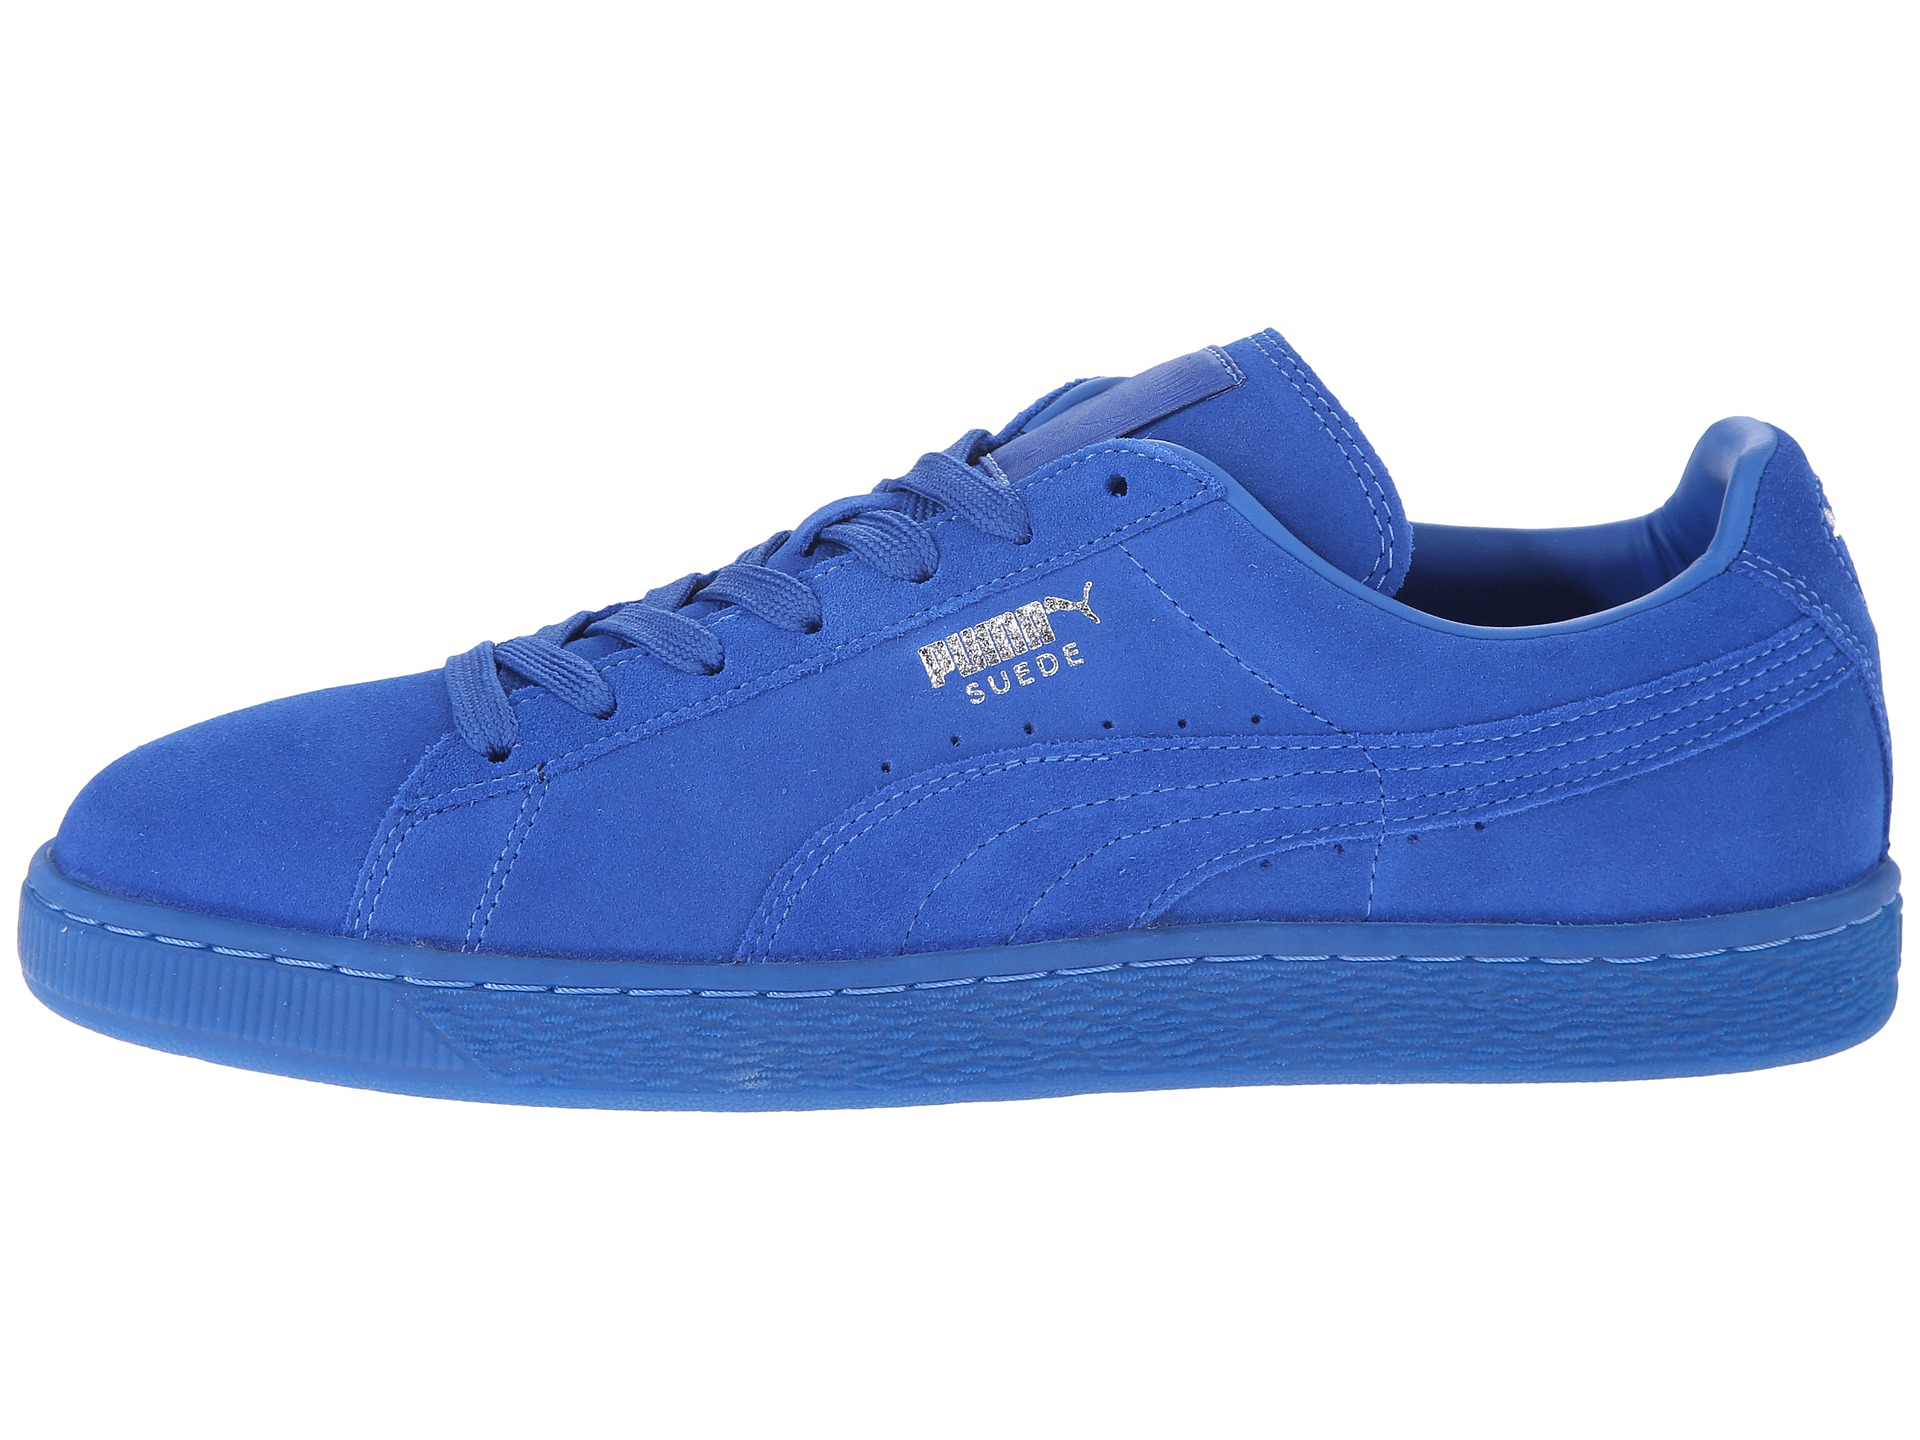 PUMA The Suede Classic+ Iced in Blue for Men - Lyst